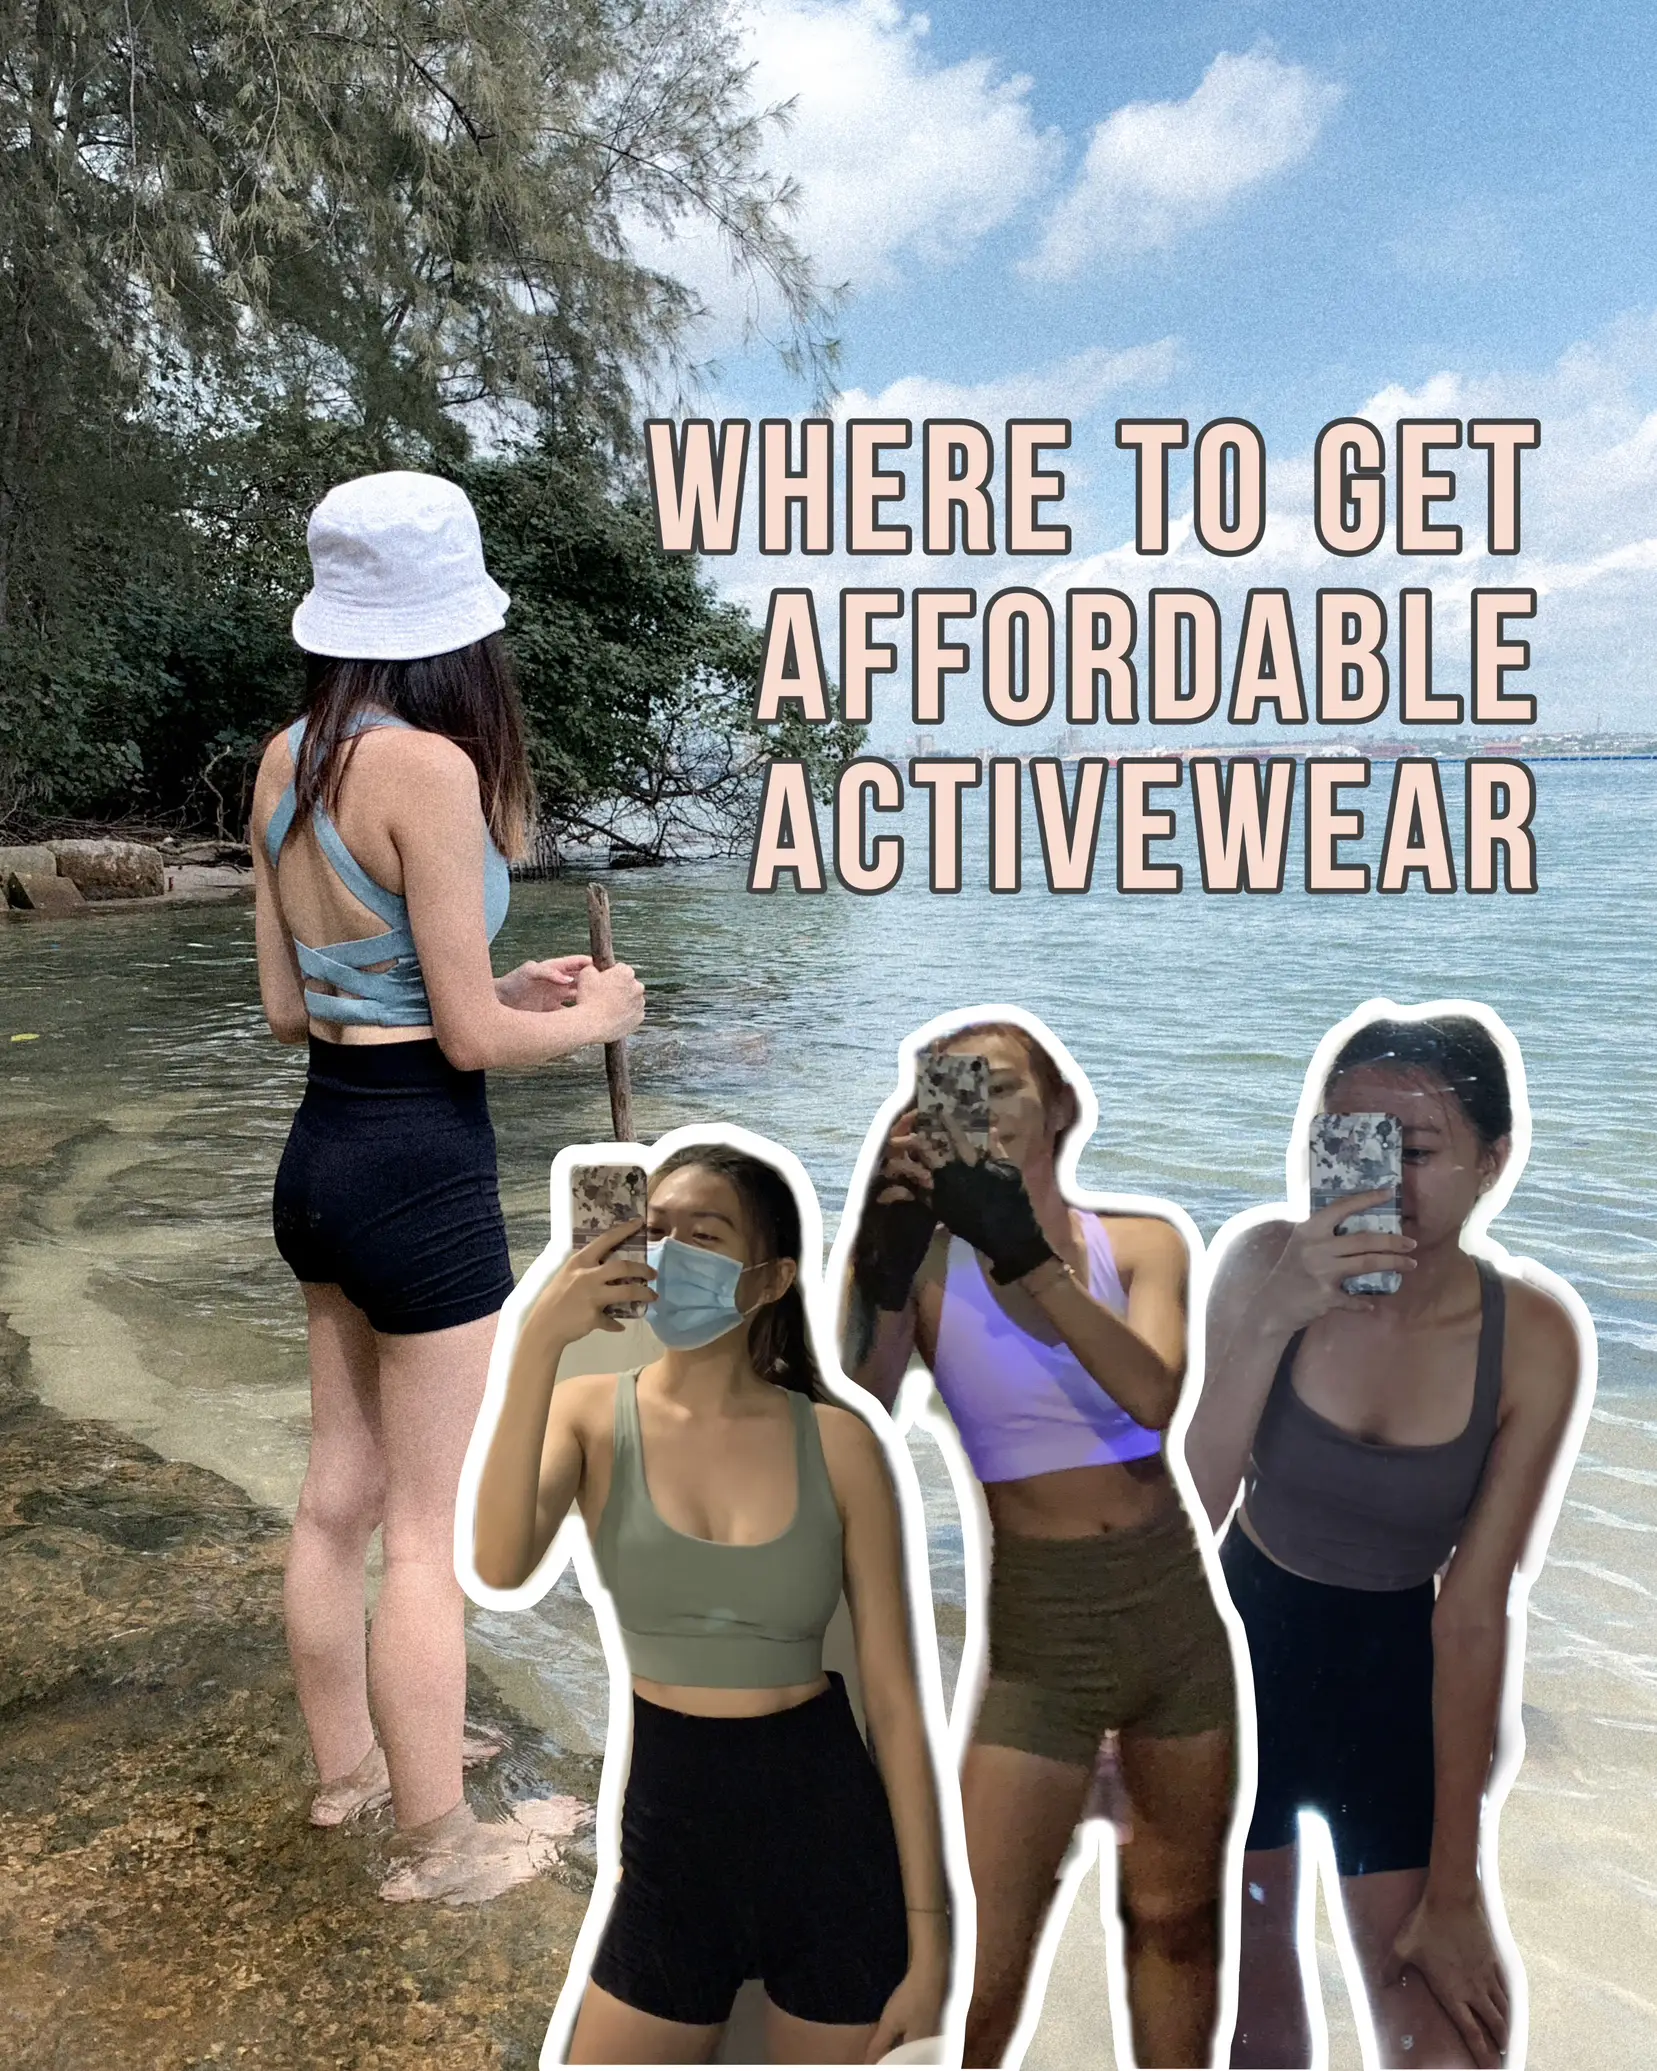 High-quality and affordable activewear